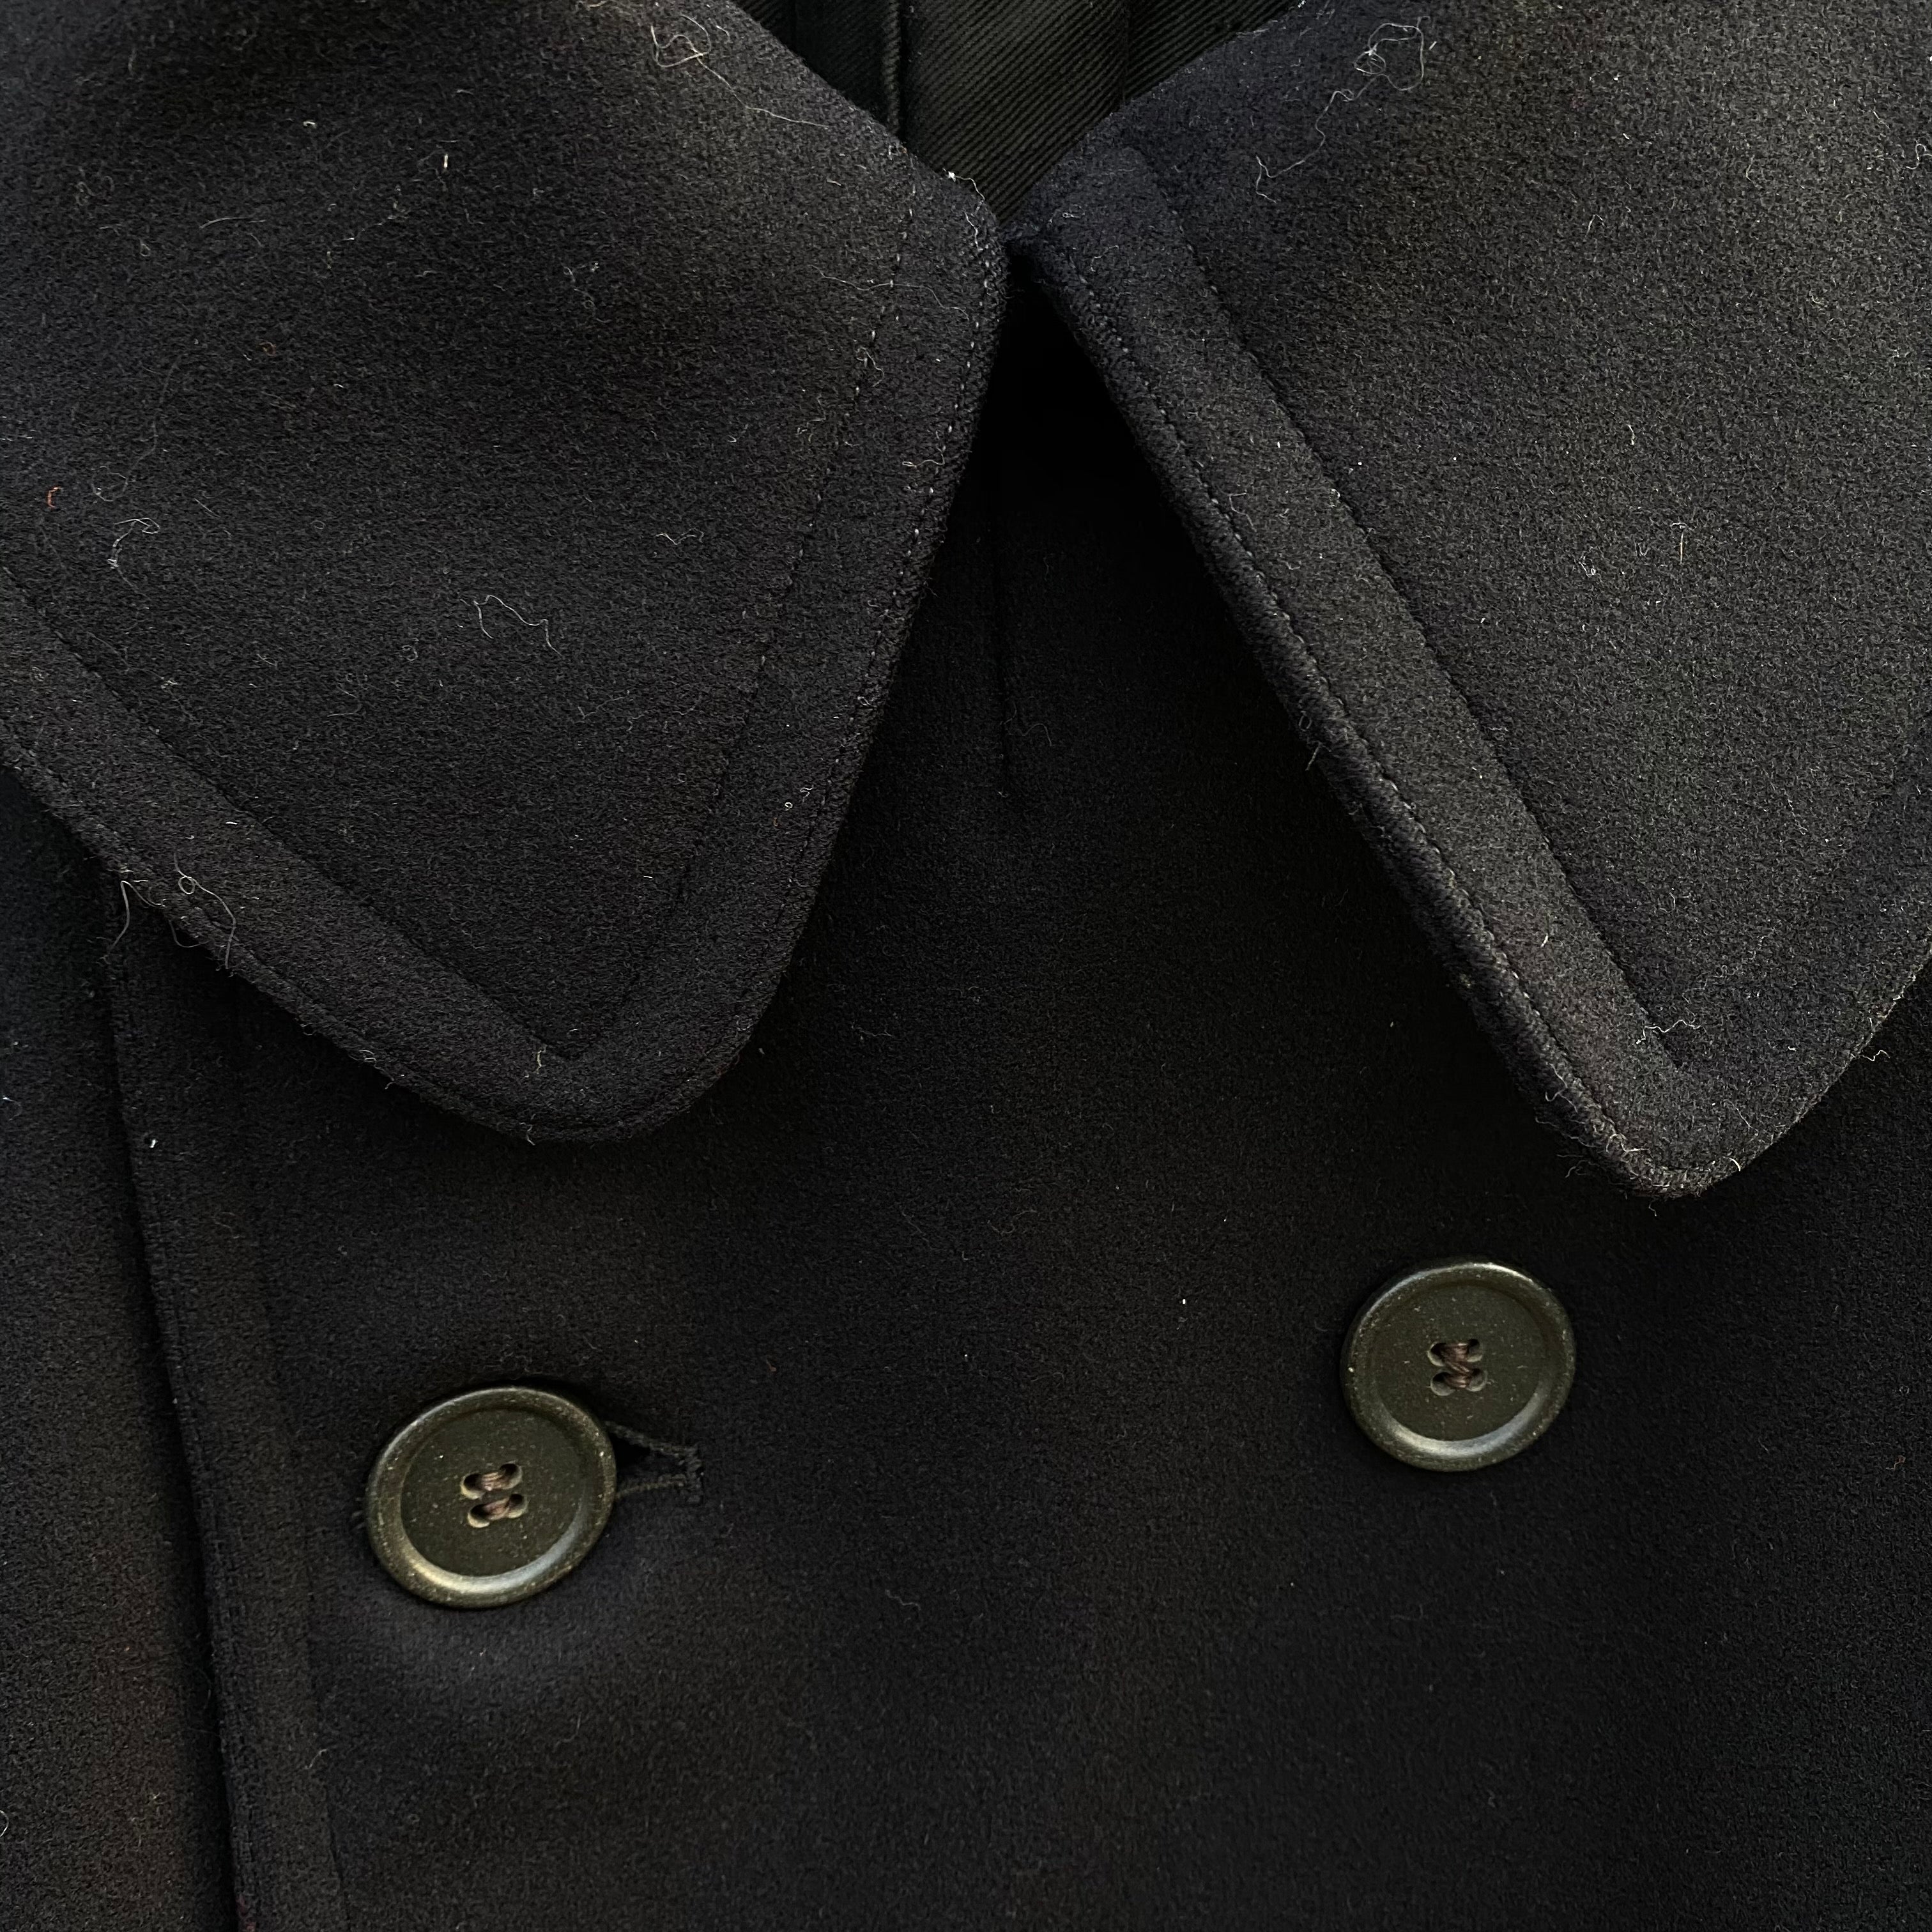 [ONLY ONE!] U.S. NAVY PEA COAT / Mr.Clean Select